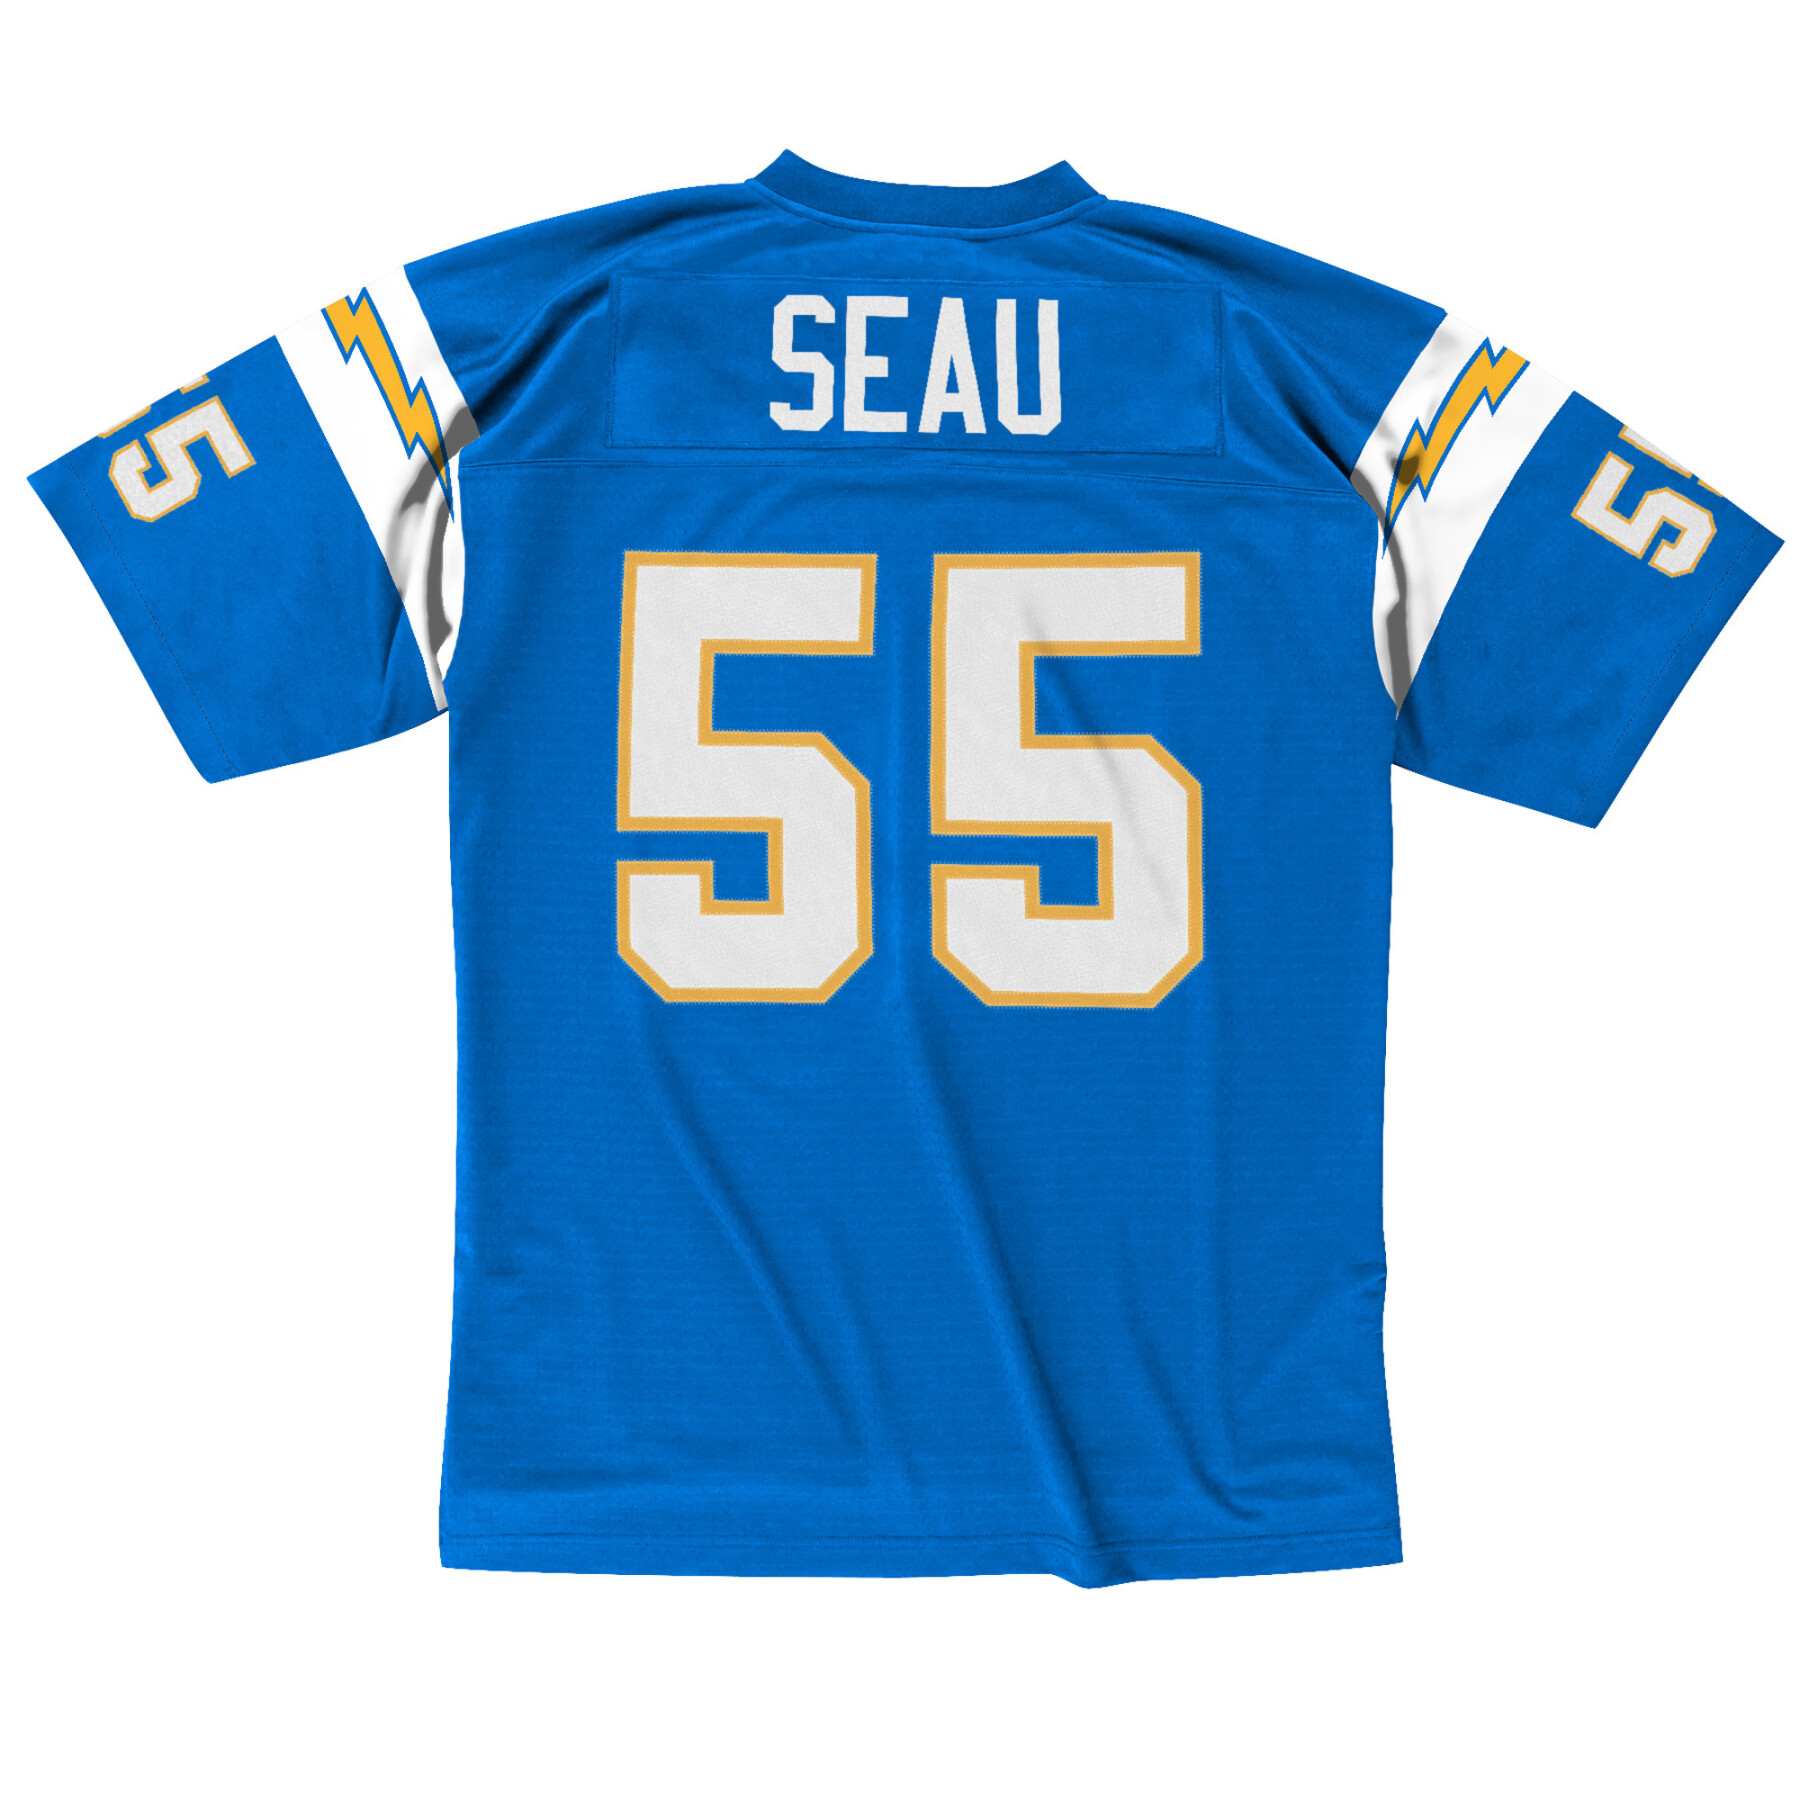 Children's heritage jersey San Diego Chargers Seau 2002